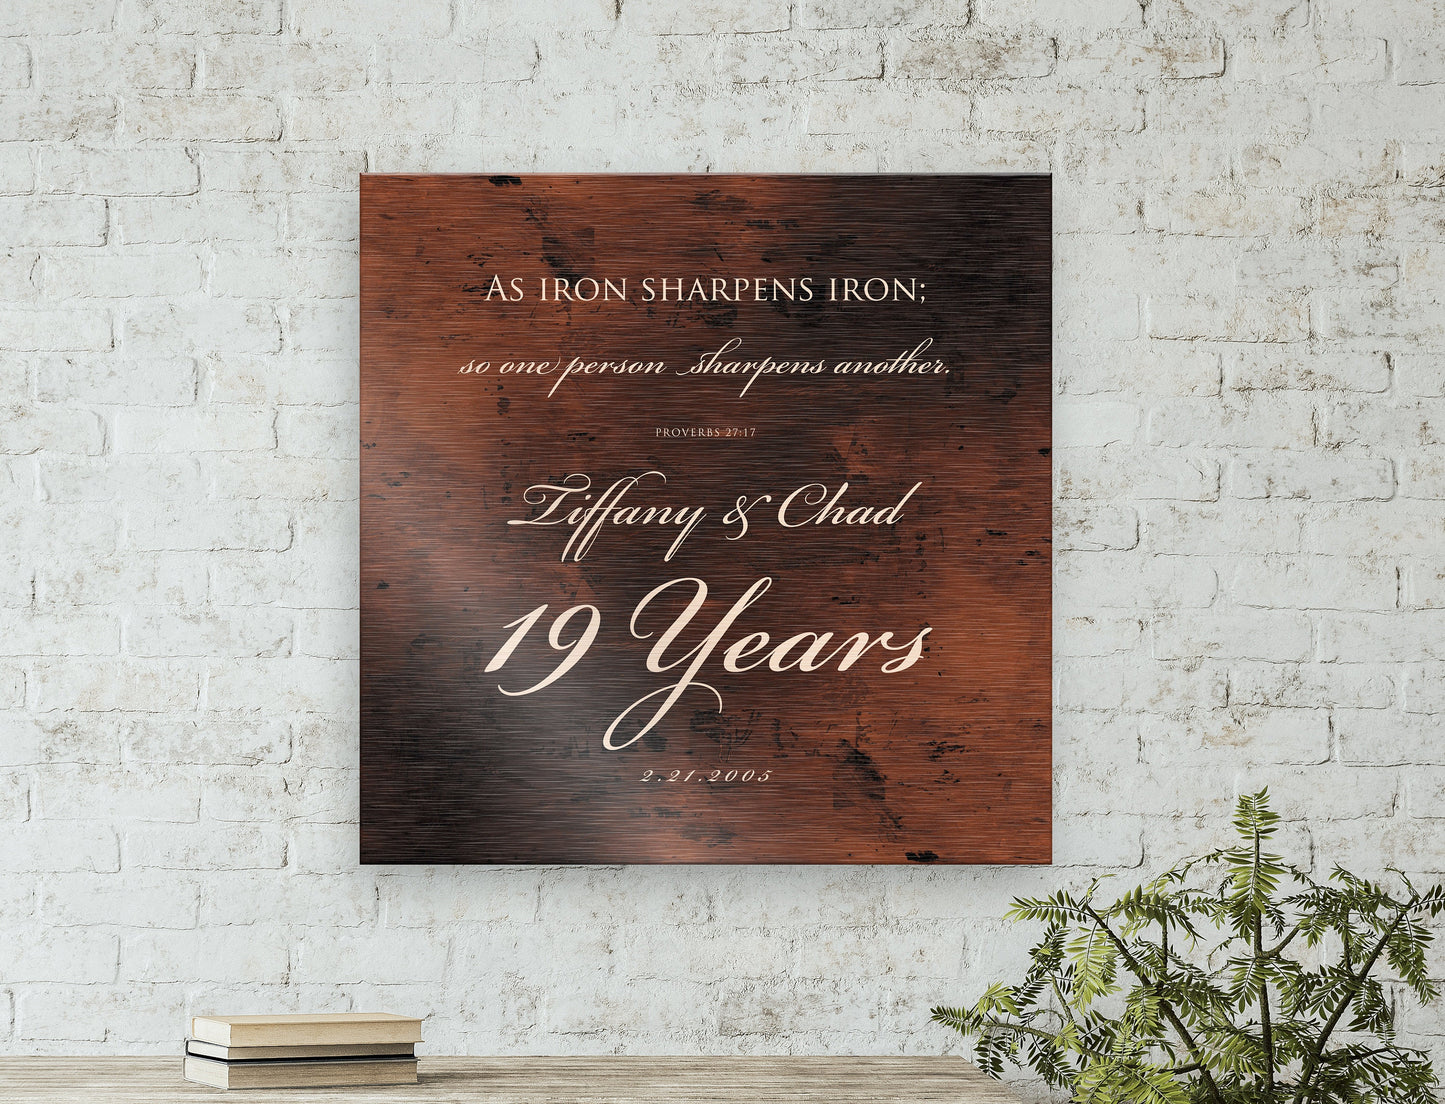 19th Anniversary Gift, Bronze Anniversary, Proverbs 27:17 sign, 19 year of marriage, Gift for husband, Personalize Christian Gift for couple